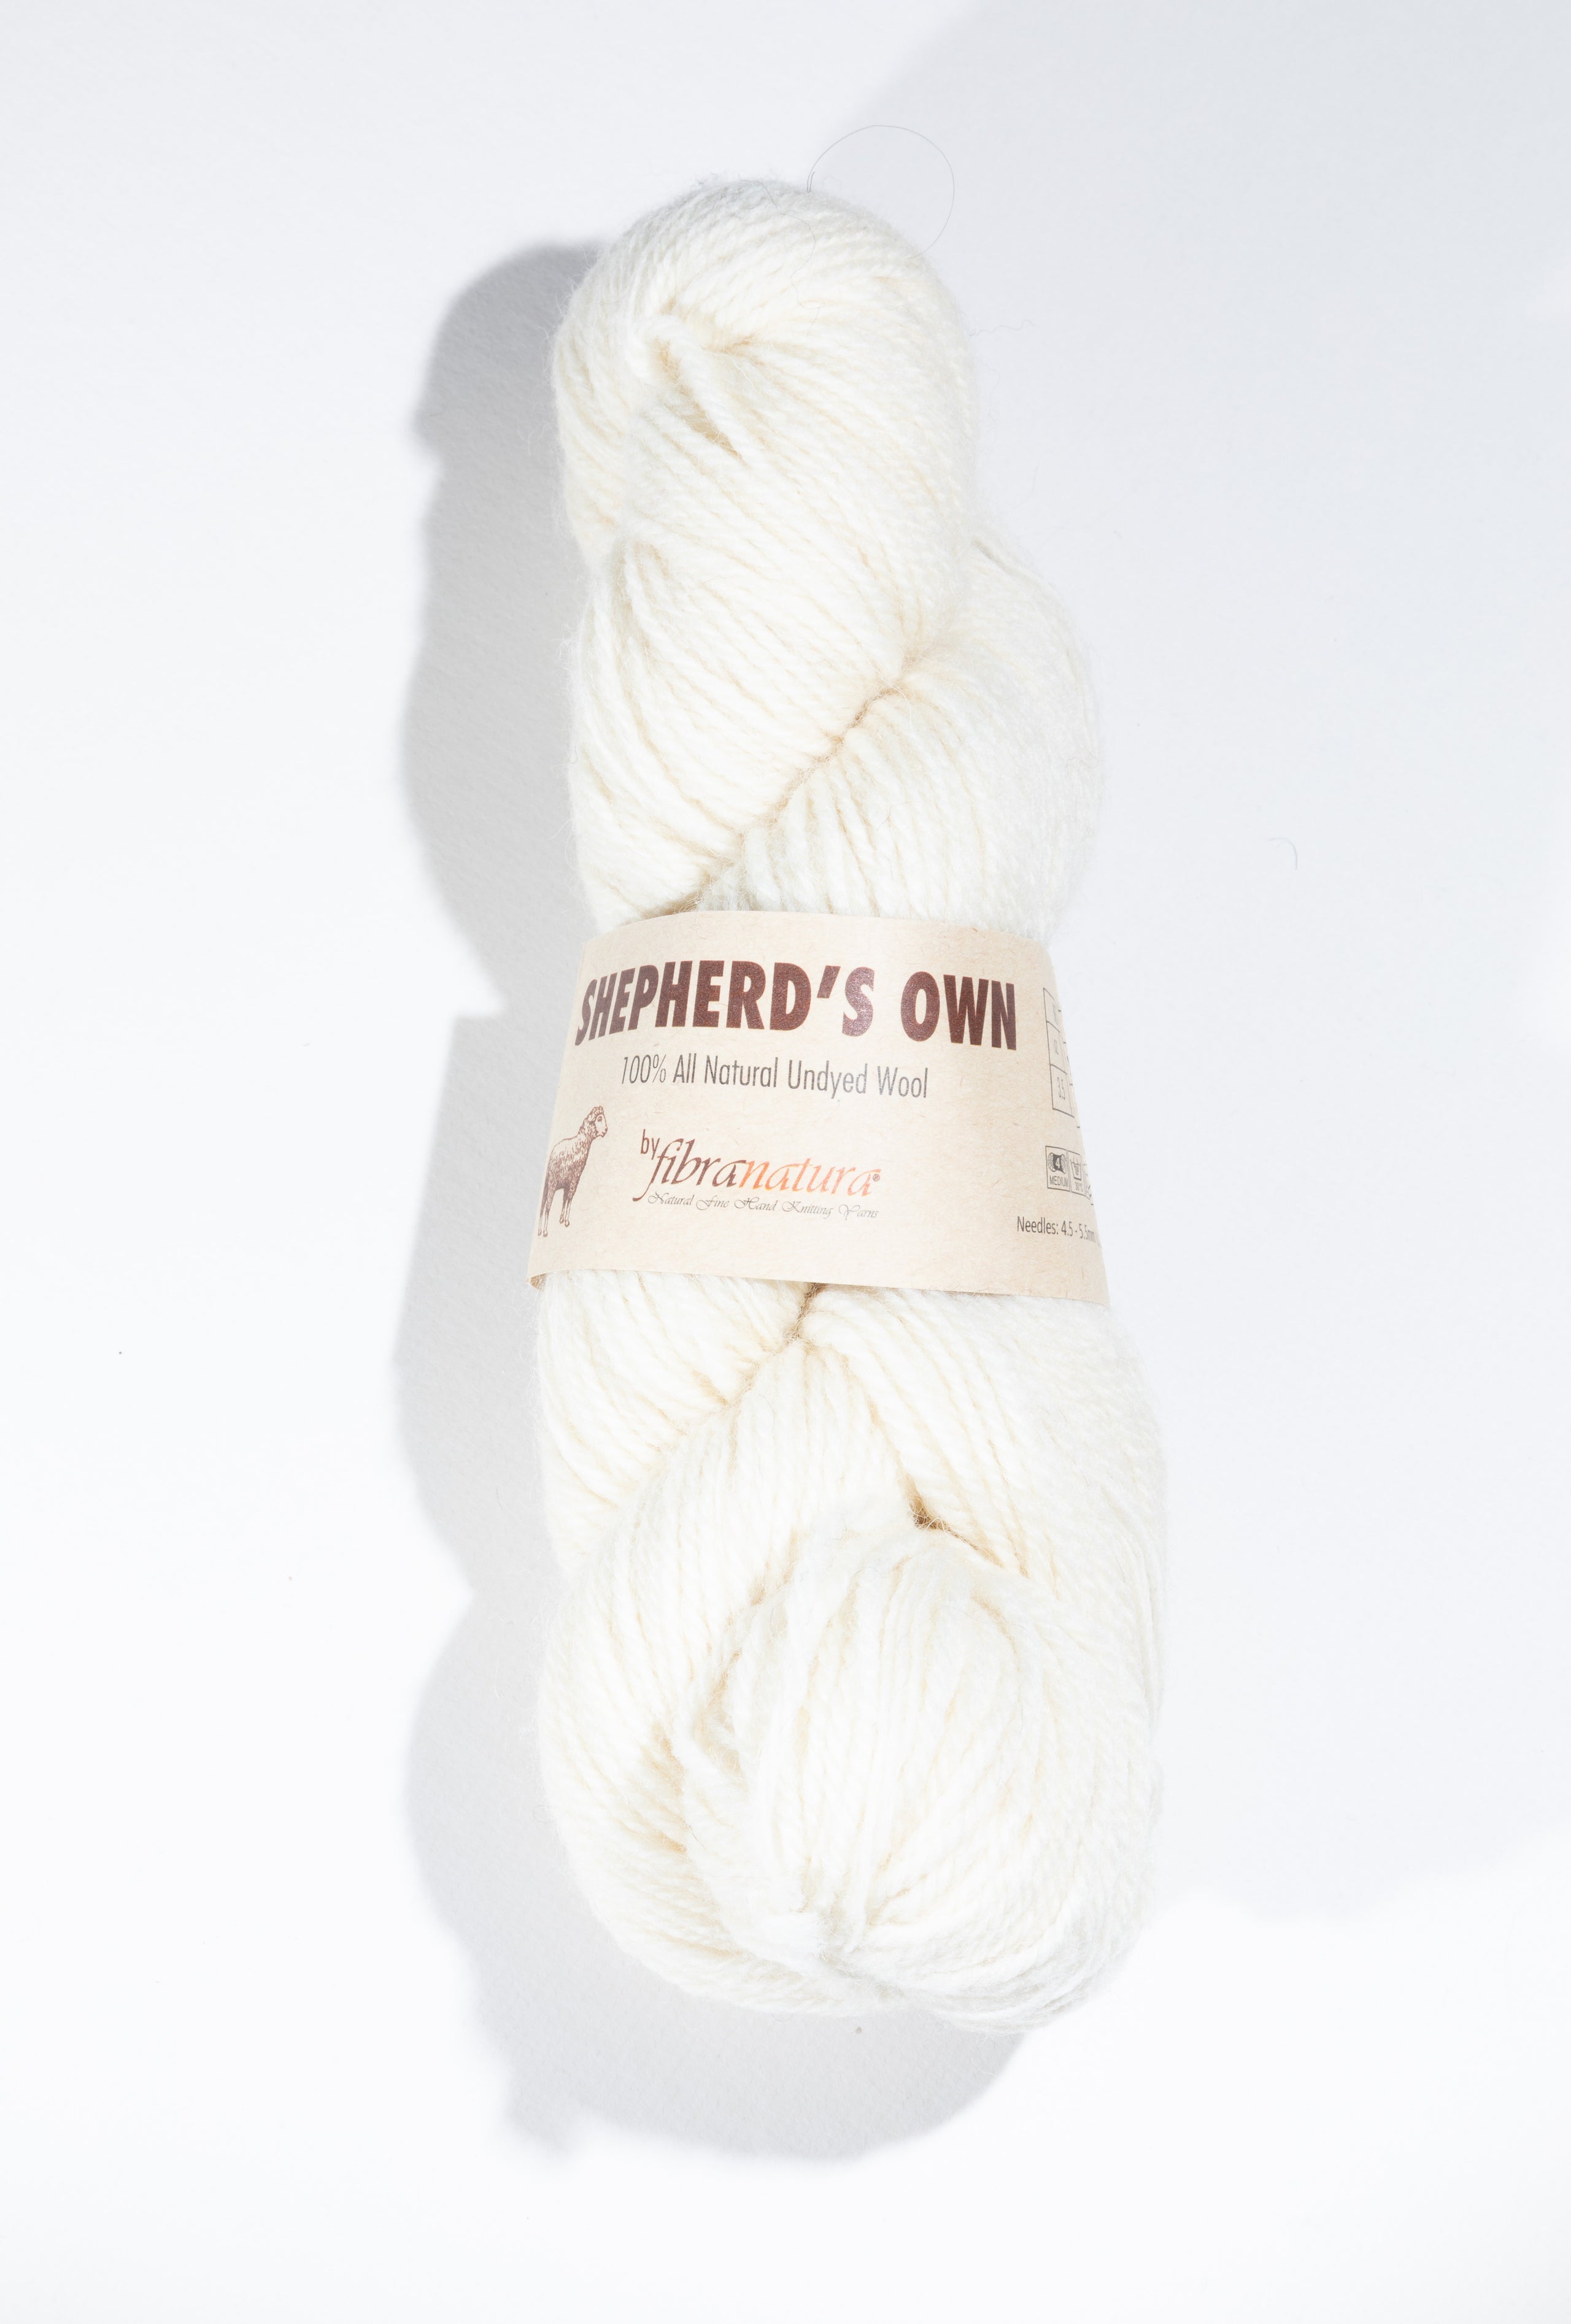 Shepherd's Own 100% All Natural Undyed Wool by Fibranatura - Color 40001